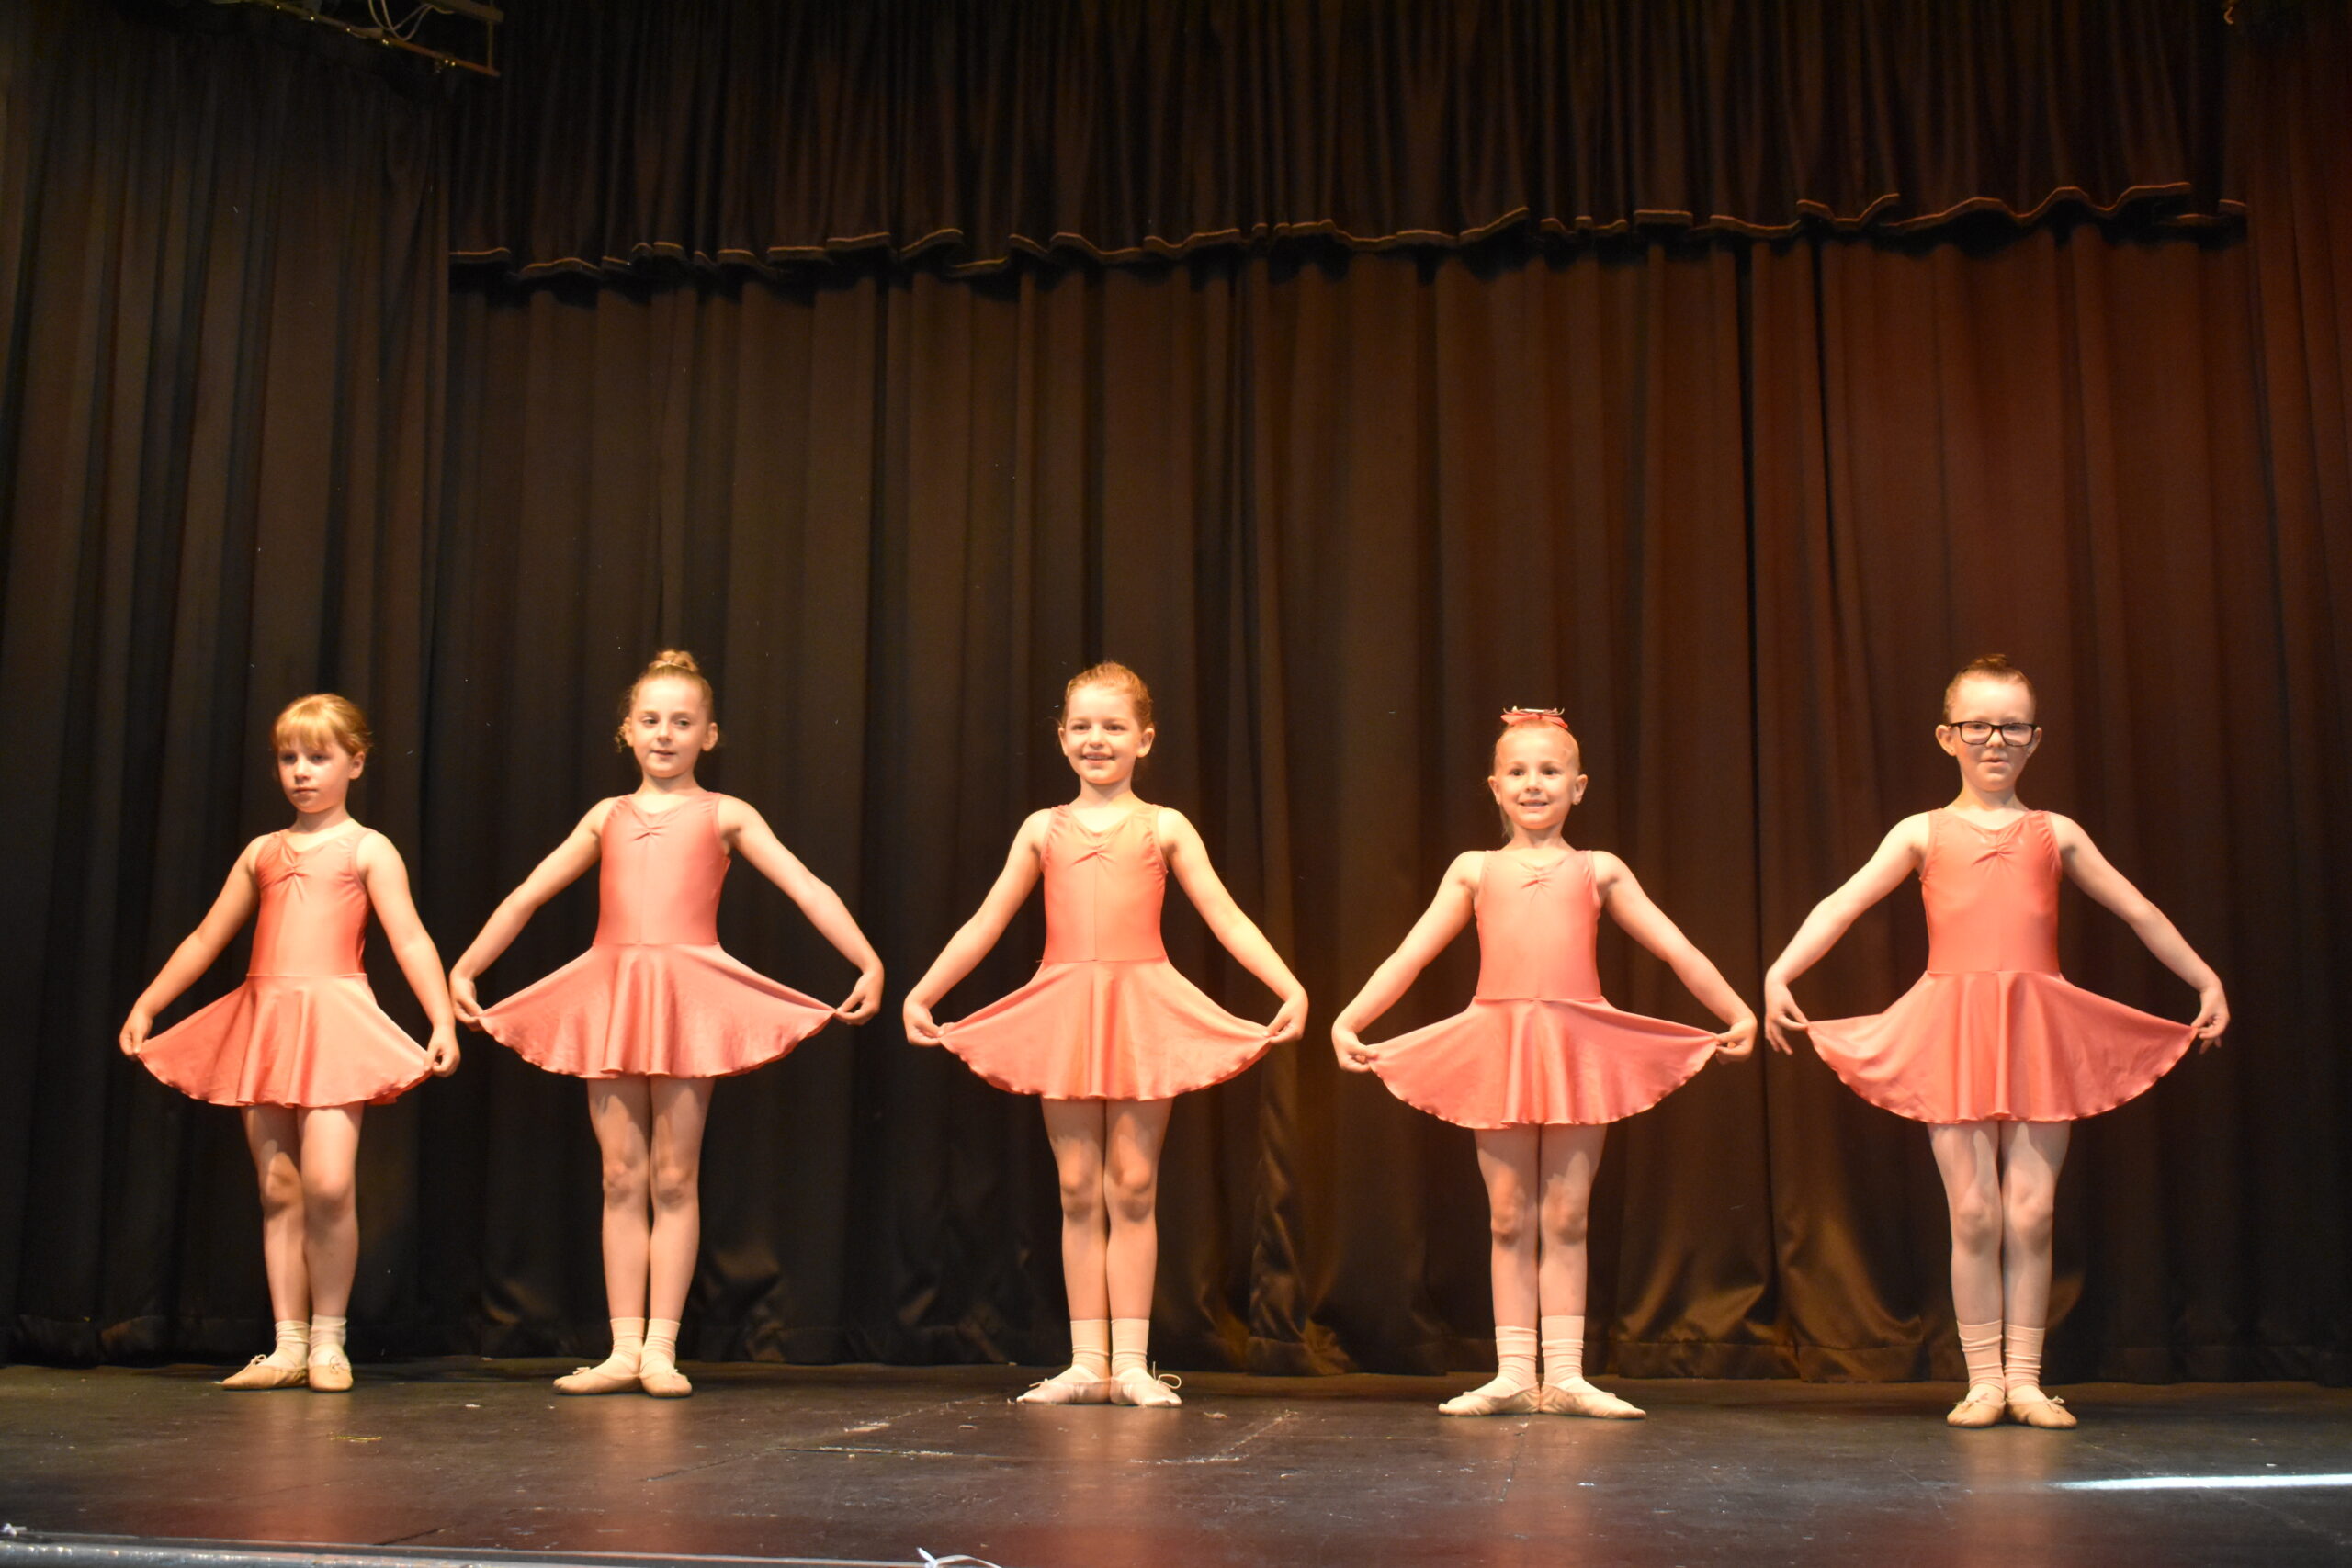 Ages 6-9 Ballet exams achievement at Chloe May's Dance Academy